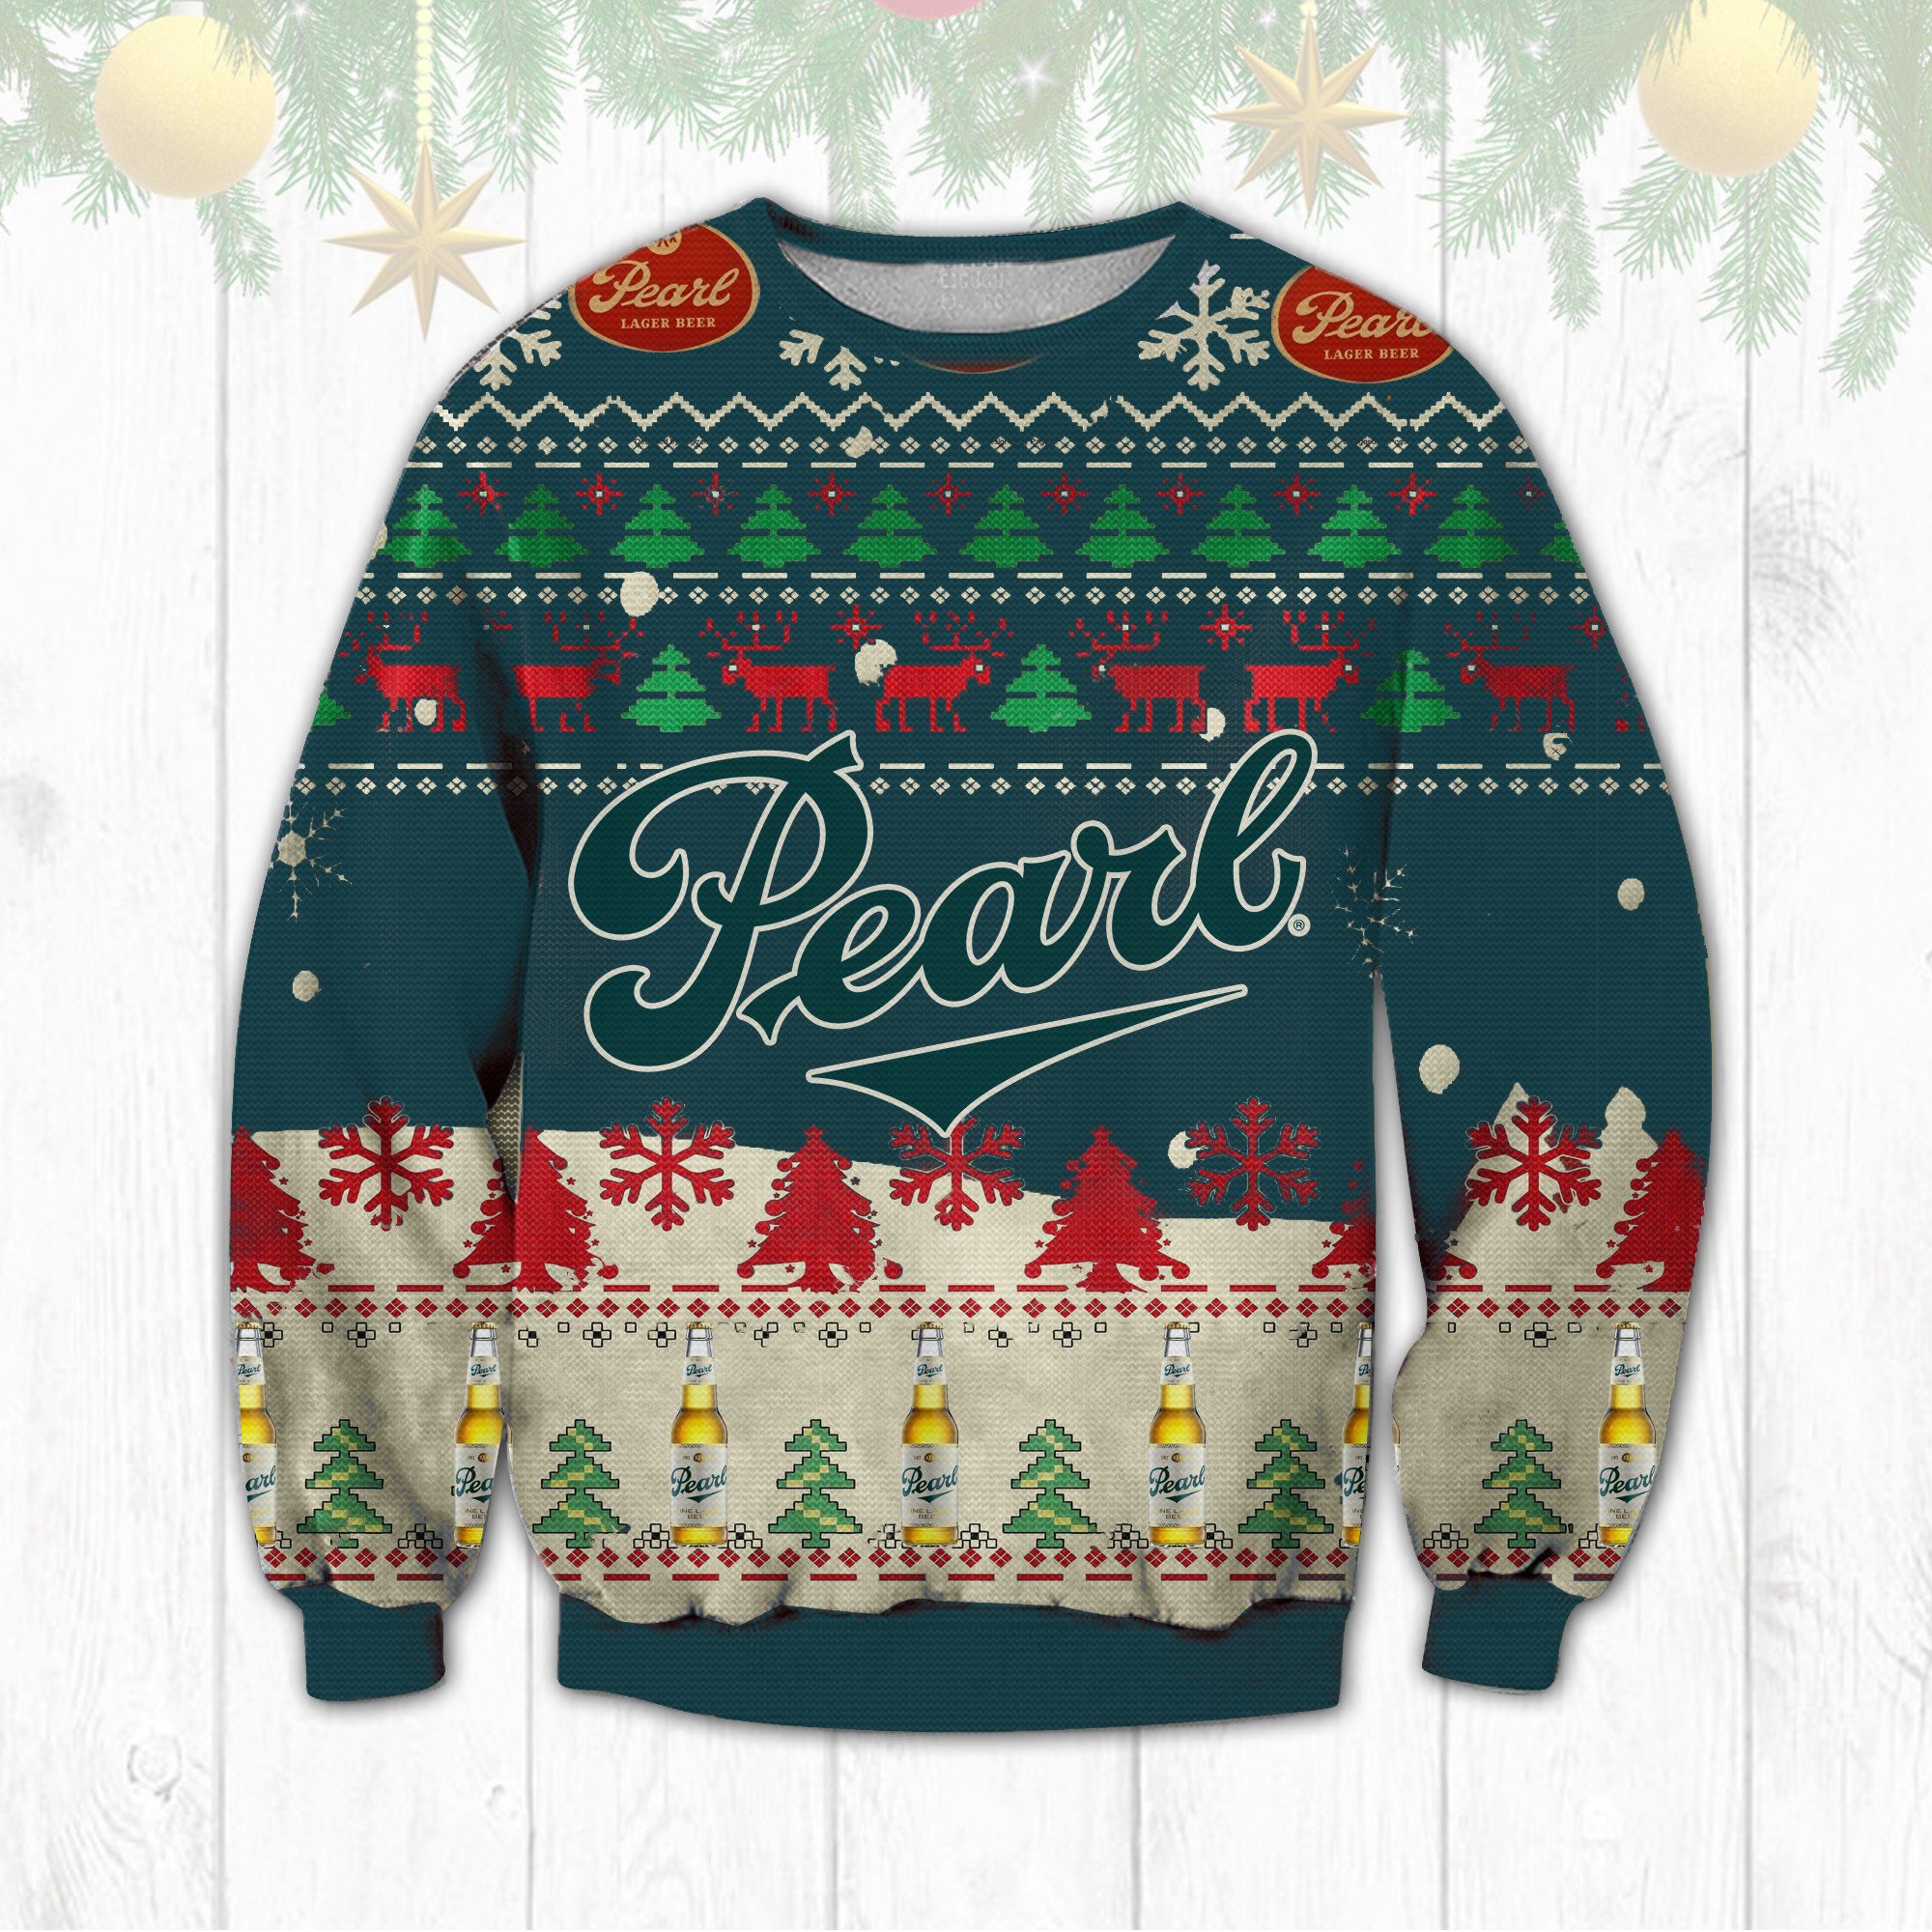 LIMITED Pearl Beer Brewing Company ugly Christmas sweater 7